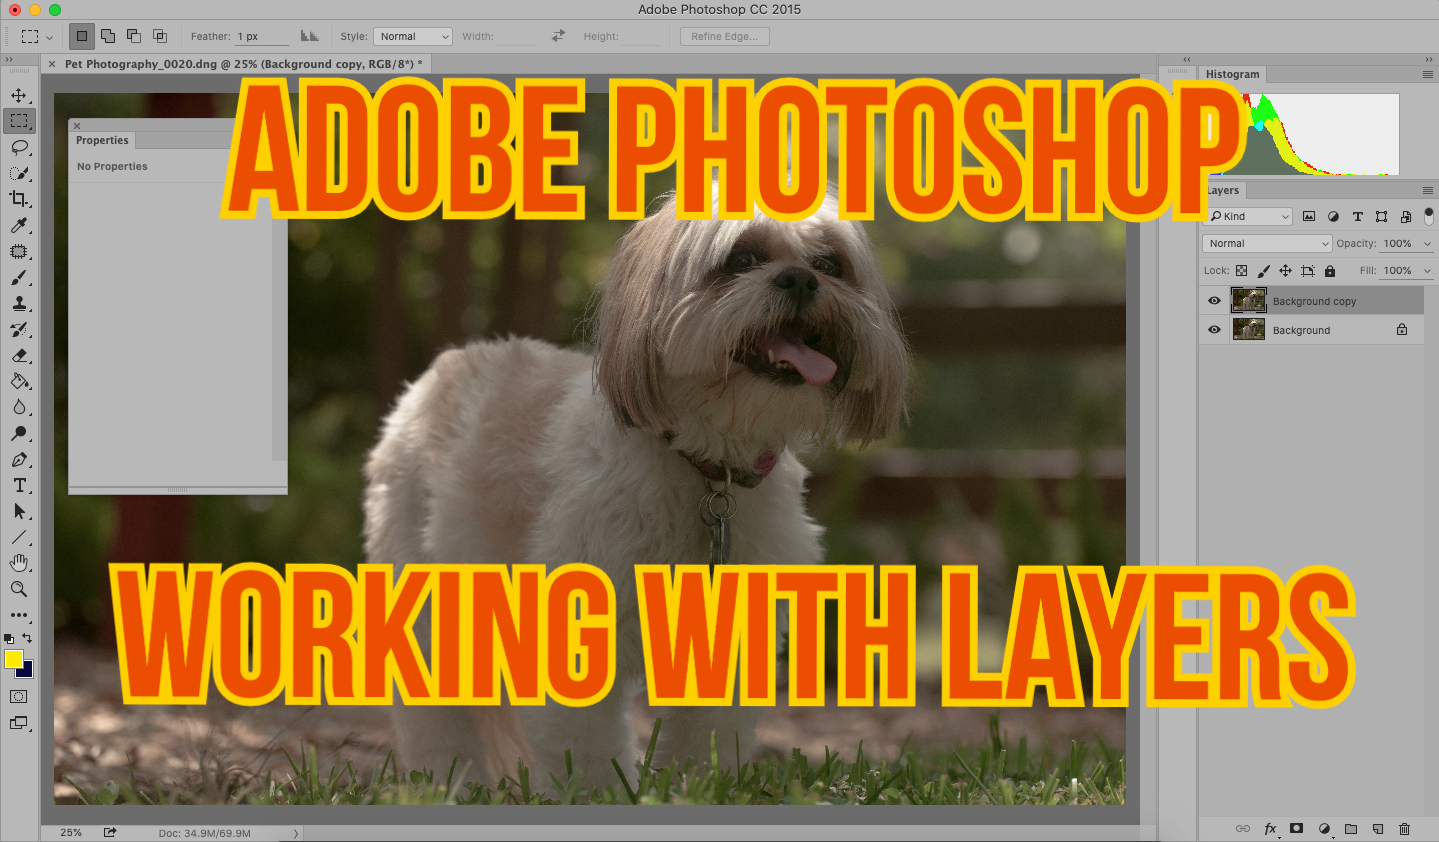 Adobe Photoshop: working with layers thumbnail